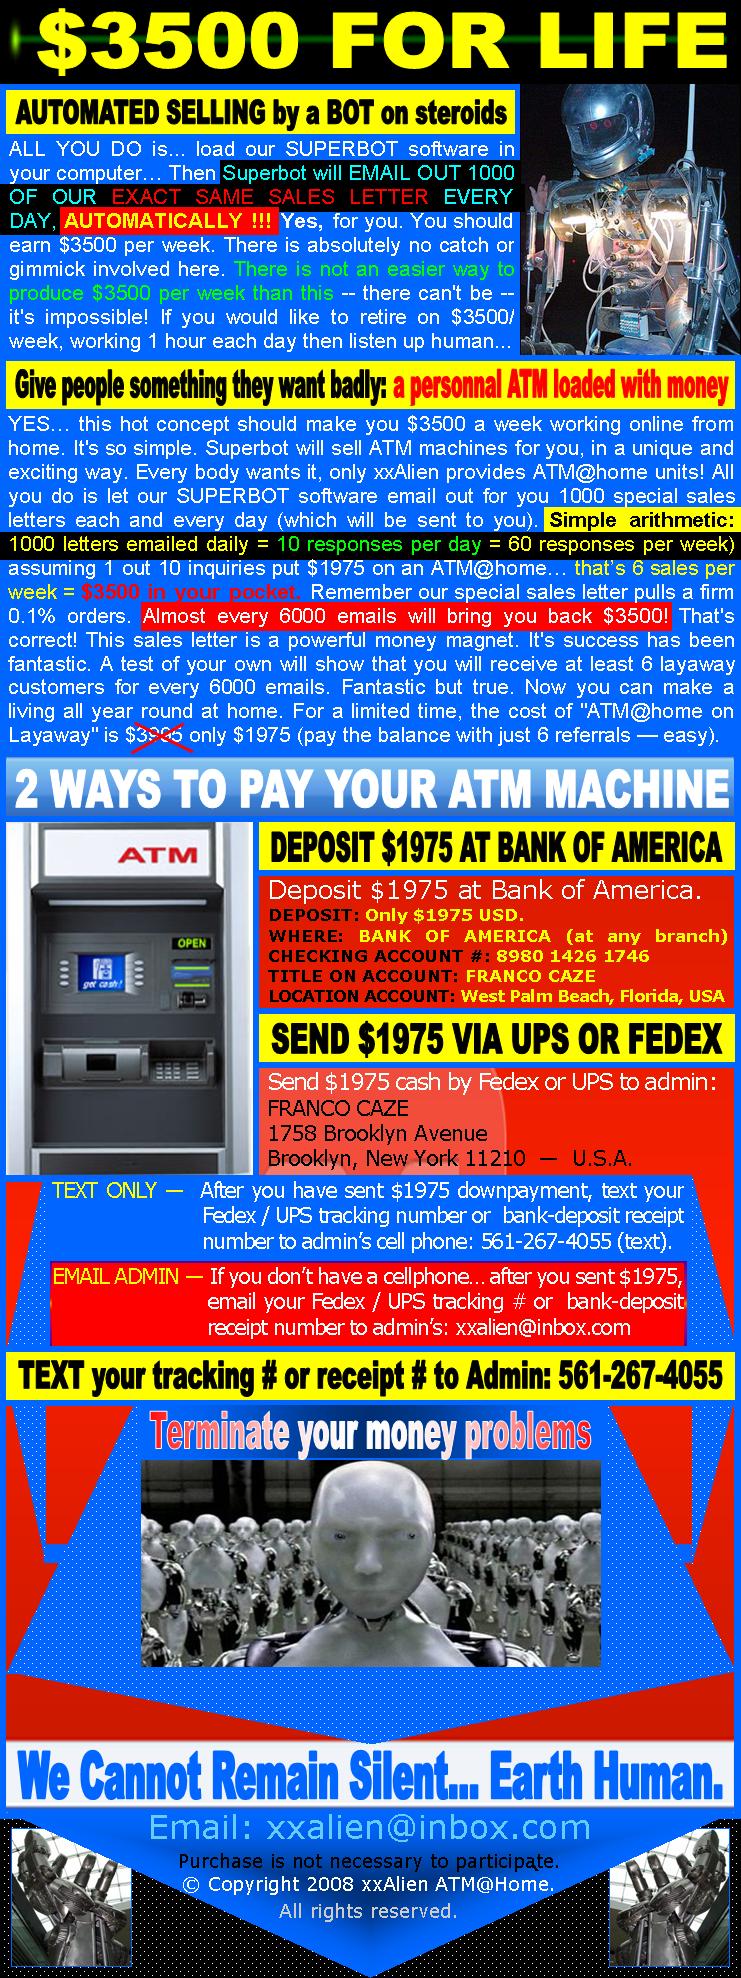 layaway-your-atm-machine-with-just-1975usd.jpg